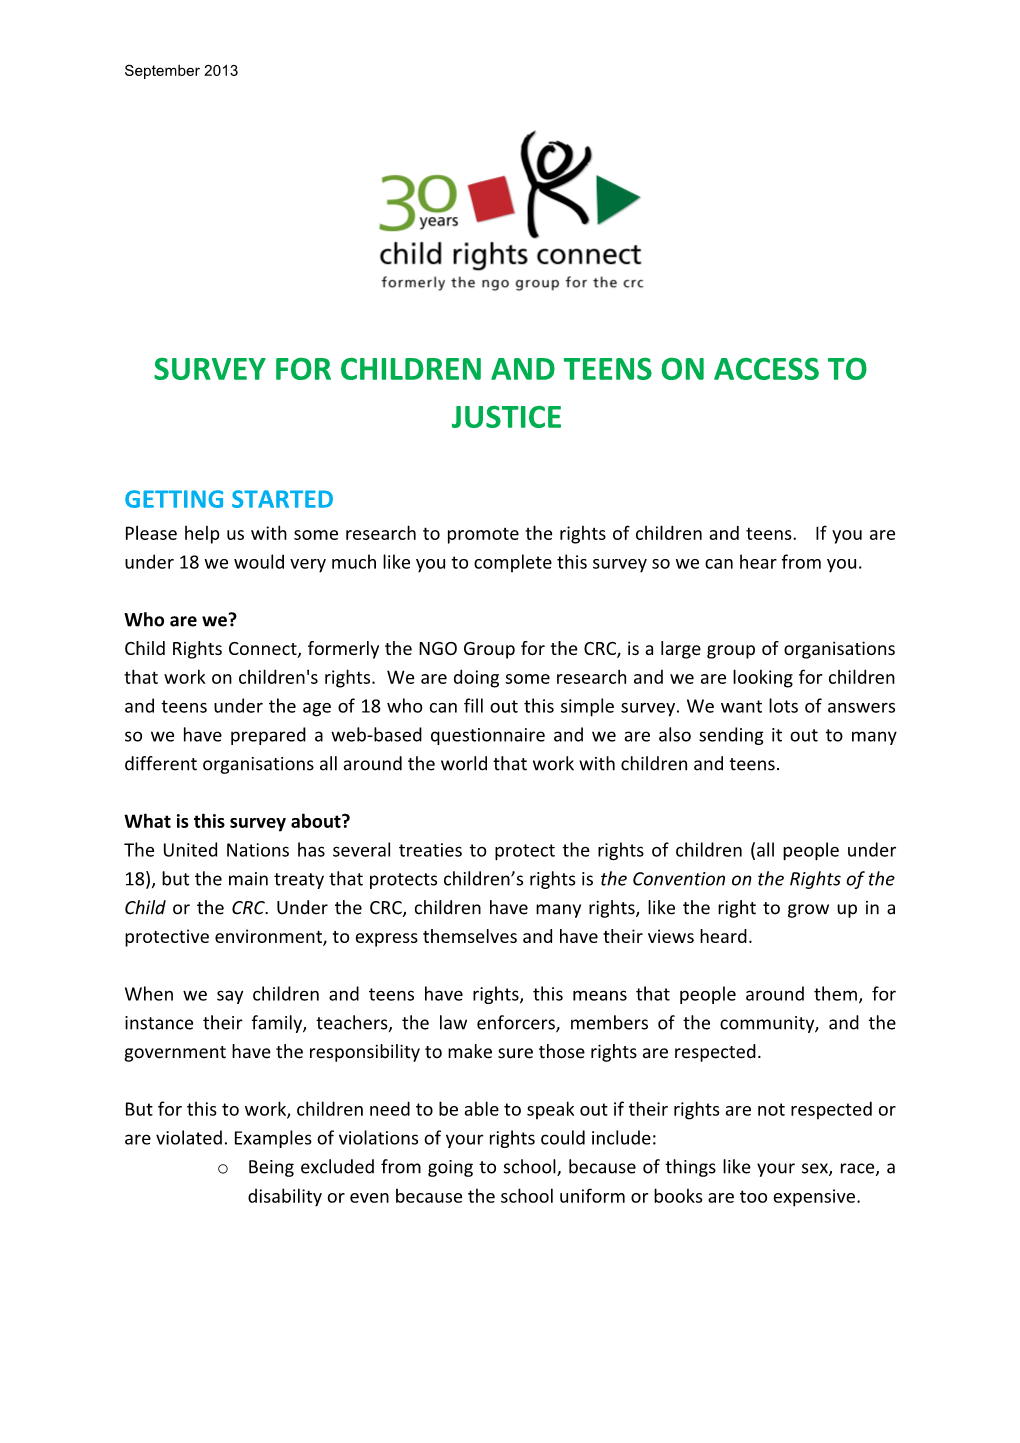 Survey for Children and Teens on Access to Justice